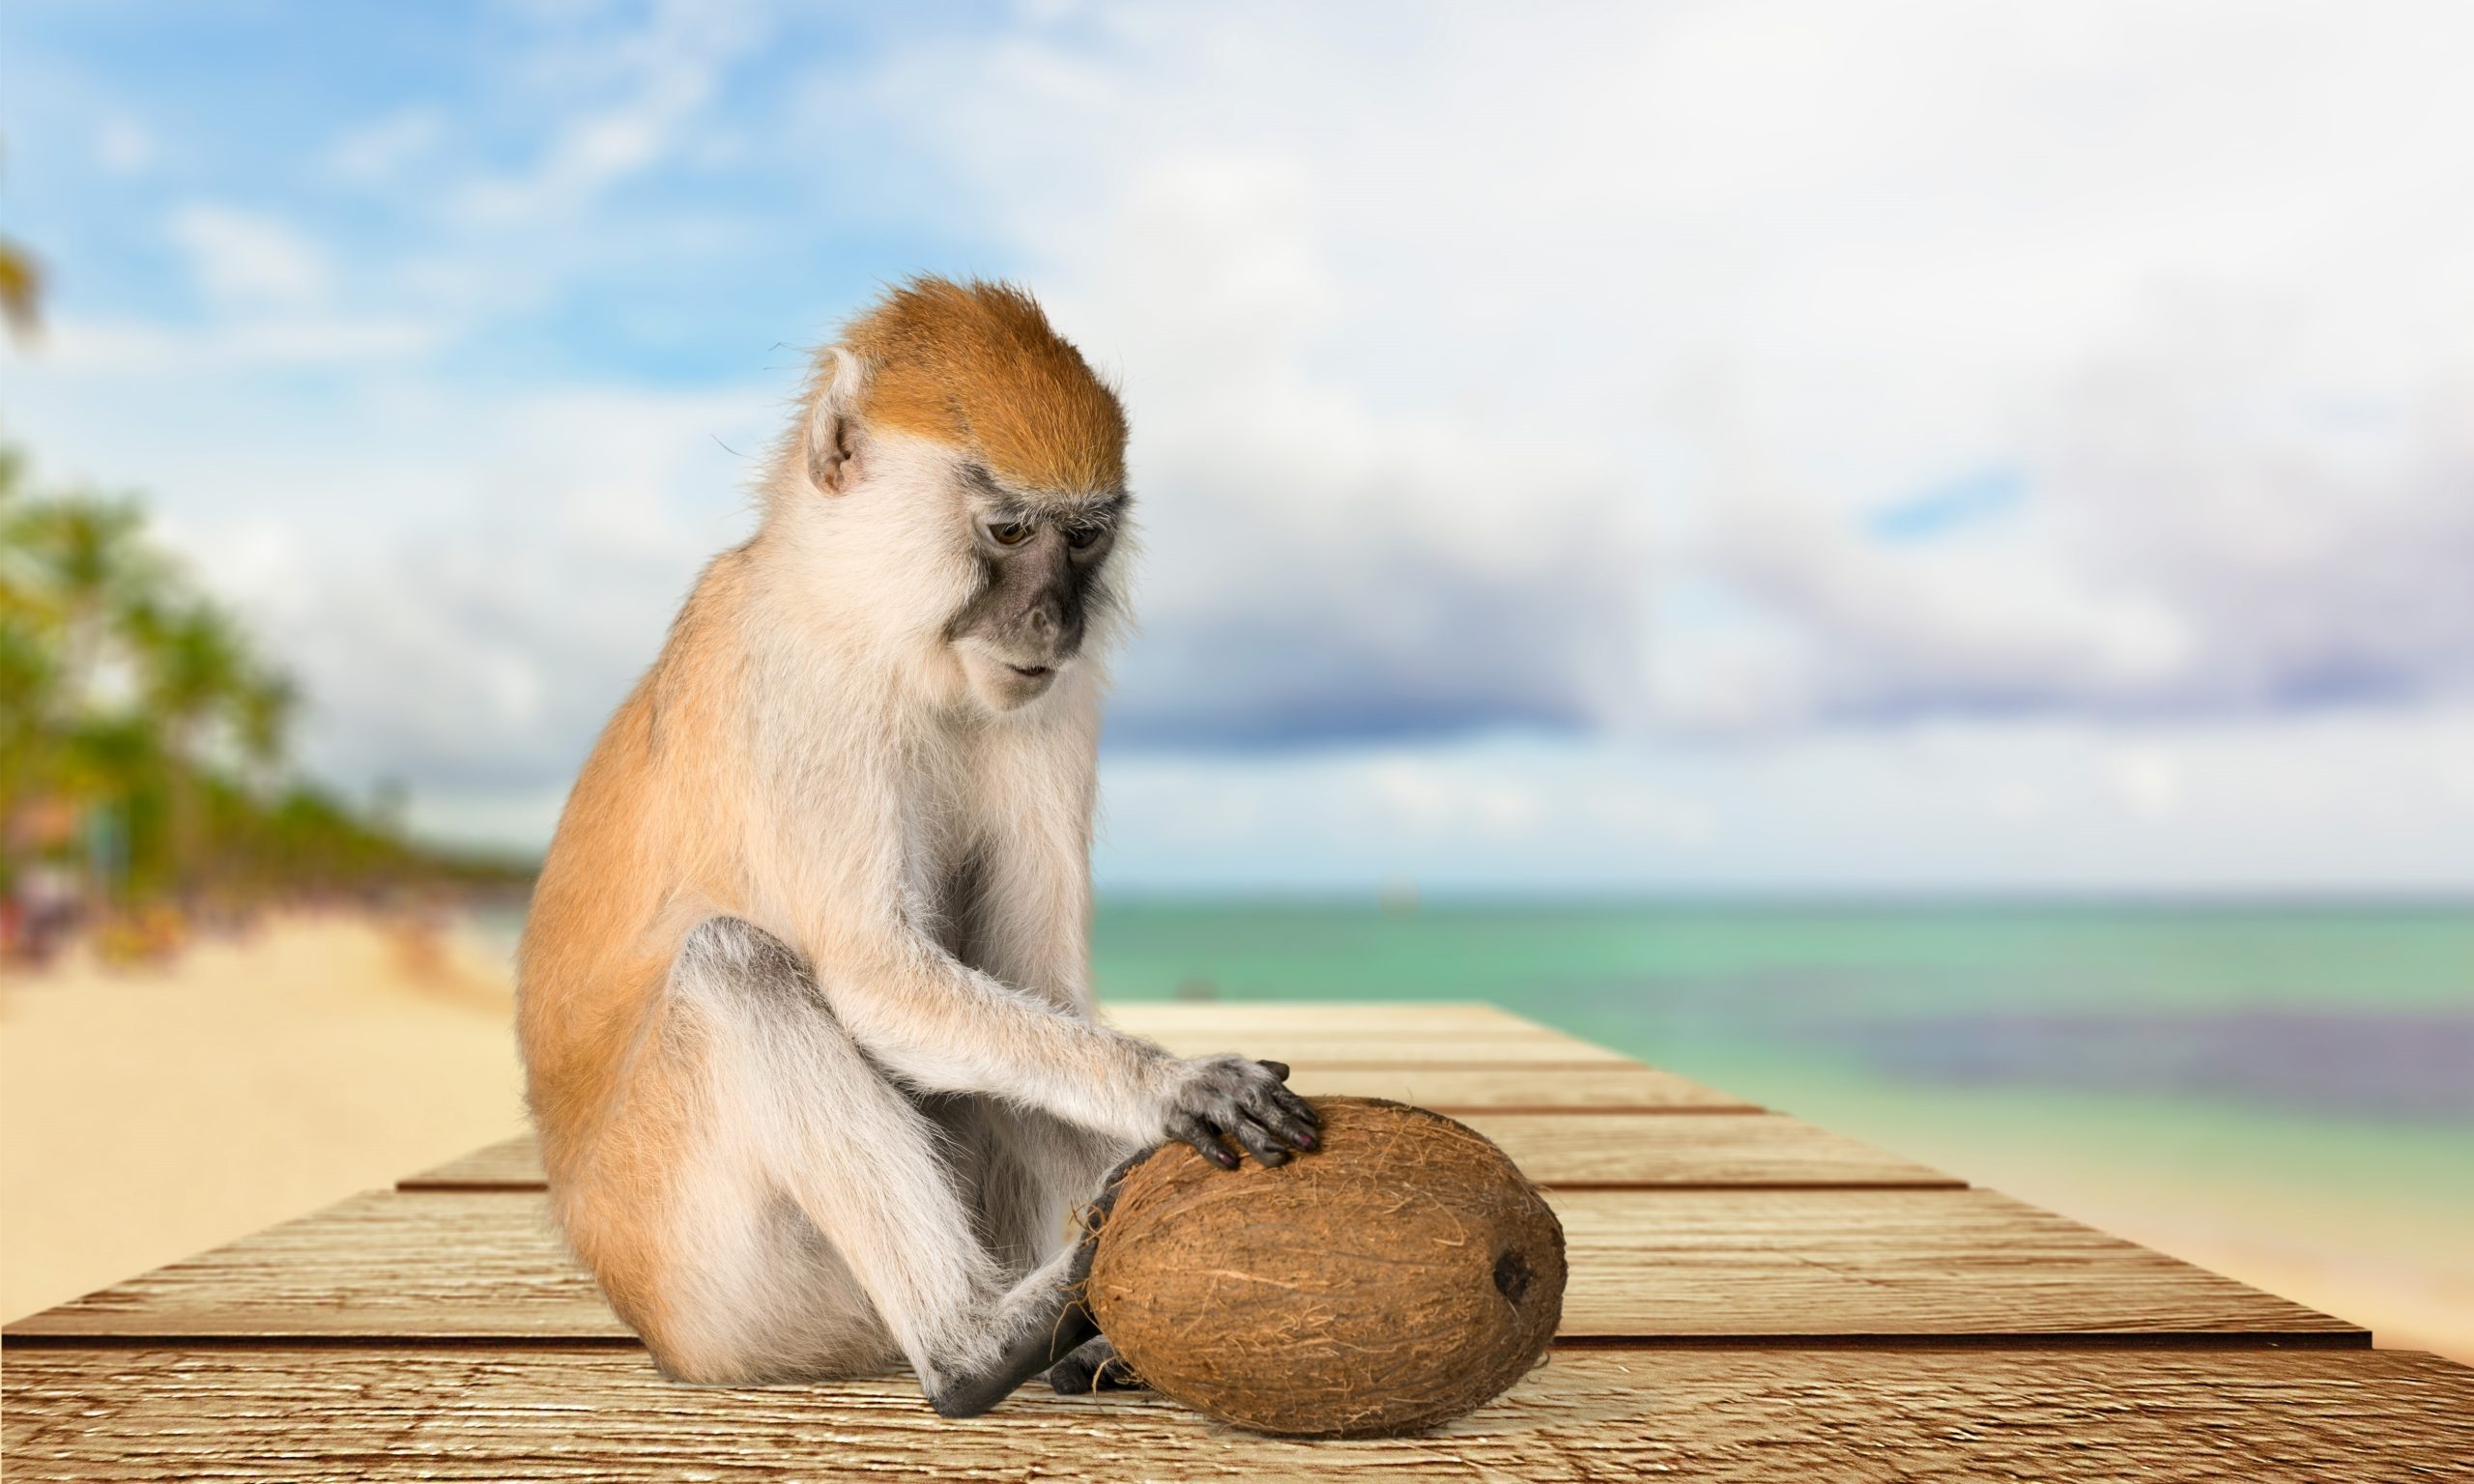 Too much Monkey Business – Stores drop coconut milk brand following exposé